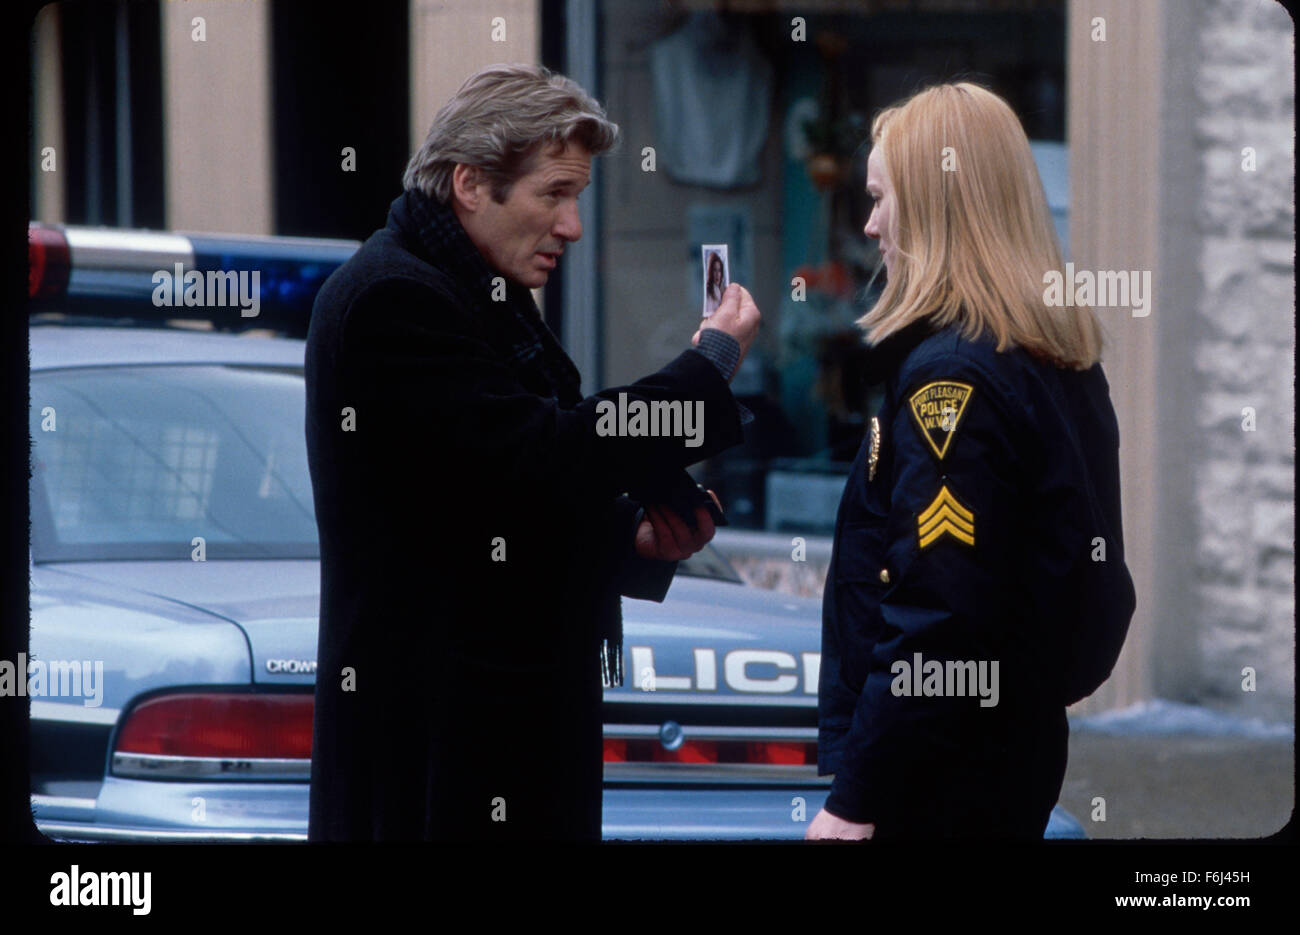 Dec 12, 2002; Hollywood, CA, USA; Actors RICHARD GERE as John Klein and LAURA LINNEY as Connie Parker in the mystery thriller 'Mothman Prophecies' directed by Mark Pellington. Stock Photo